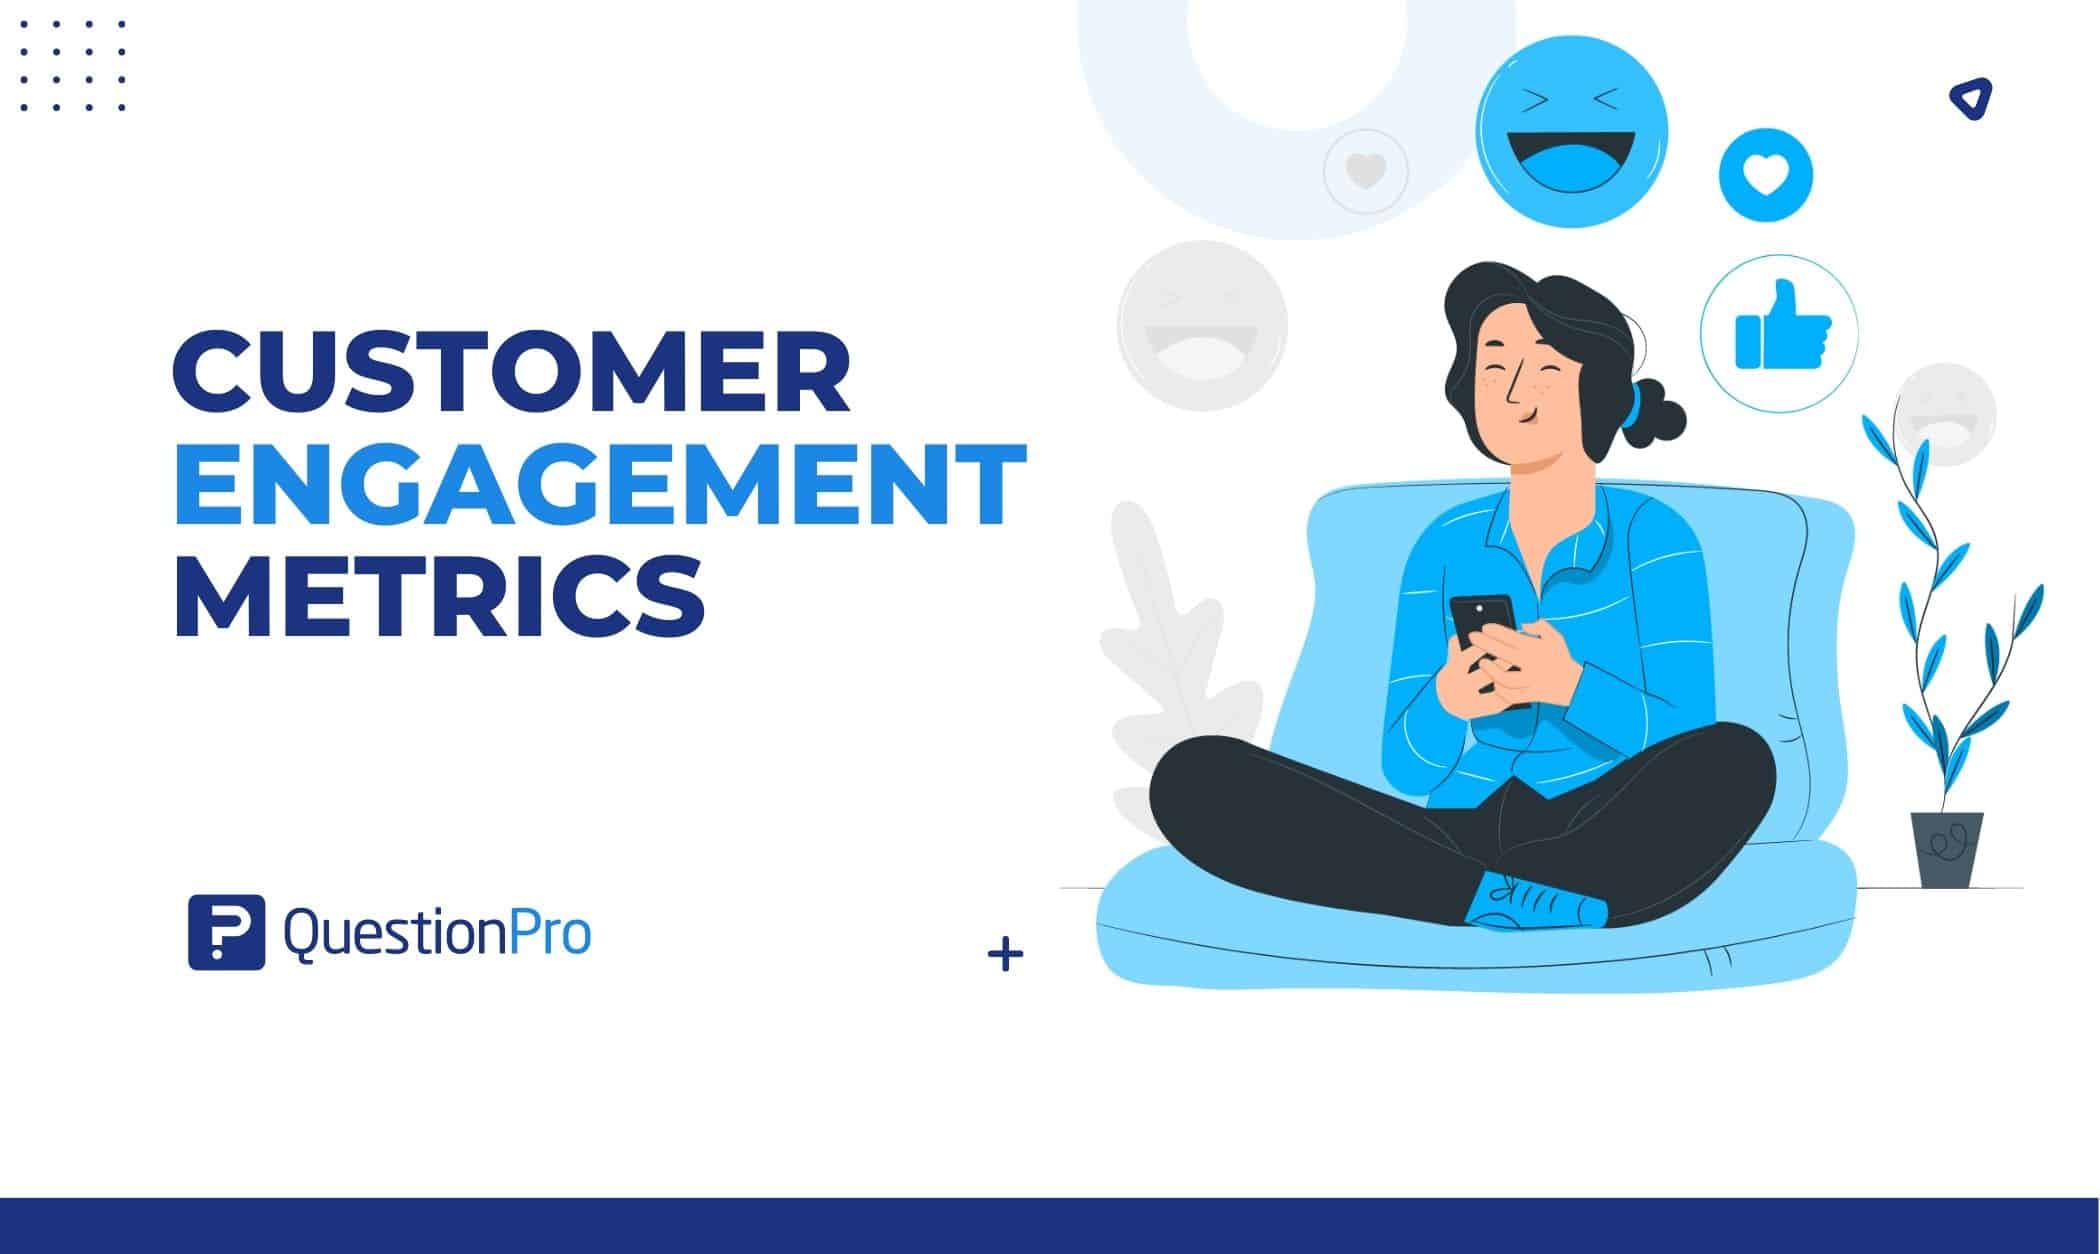 Picking the proper customer engagement metrics is all about getting the data that help you make smarter and more precise business decisions.